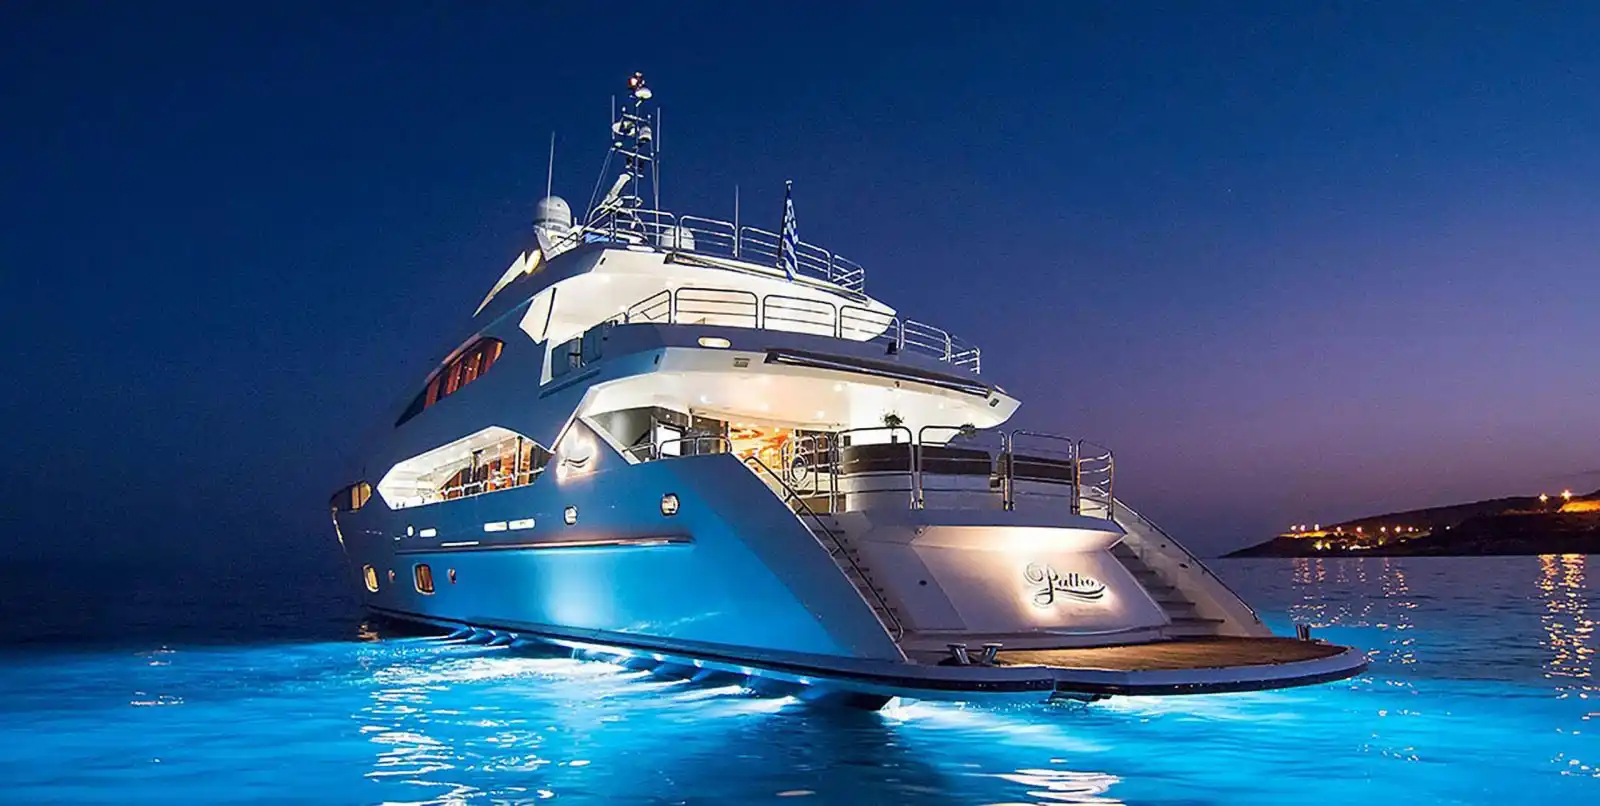 Why Choose Mykonos and Yacht Rentals?